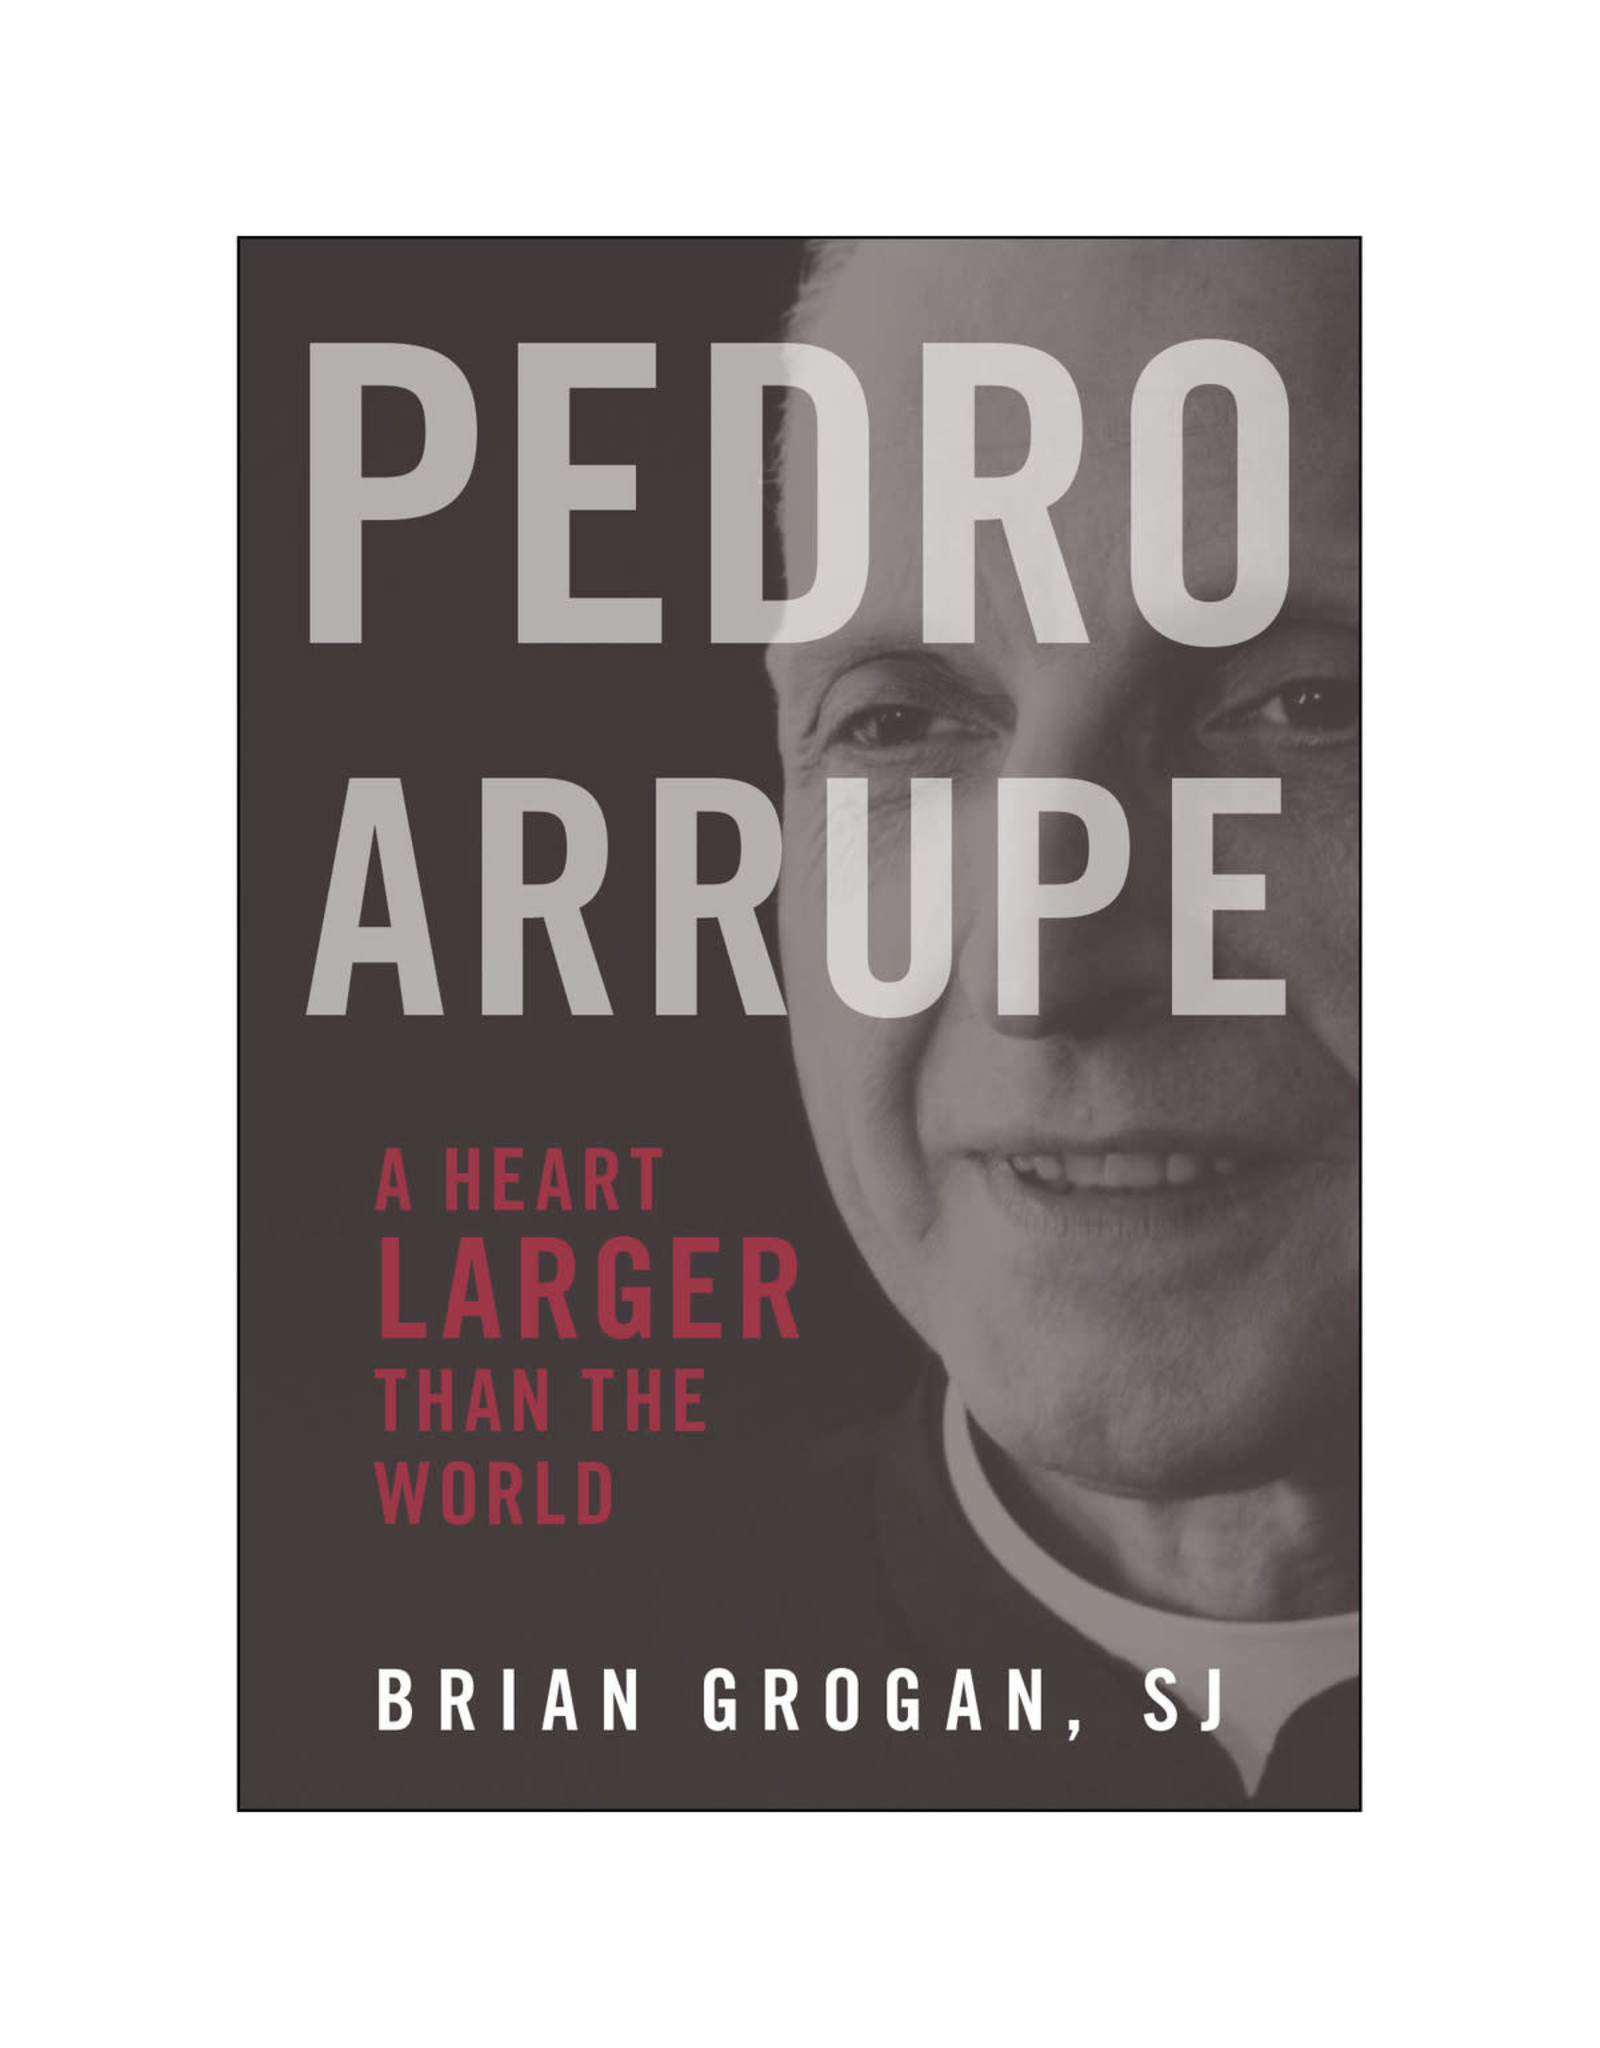 Pedro Arrupe:  A Heart Larger Than the World